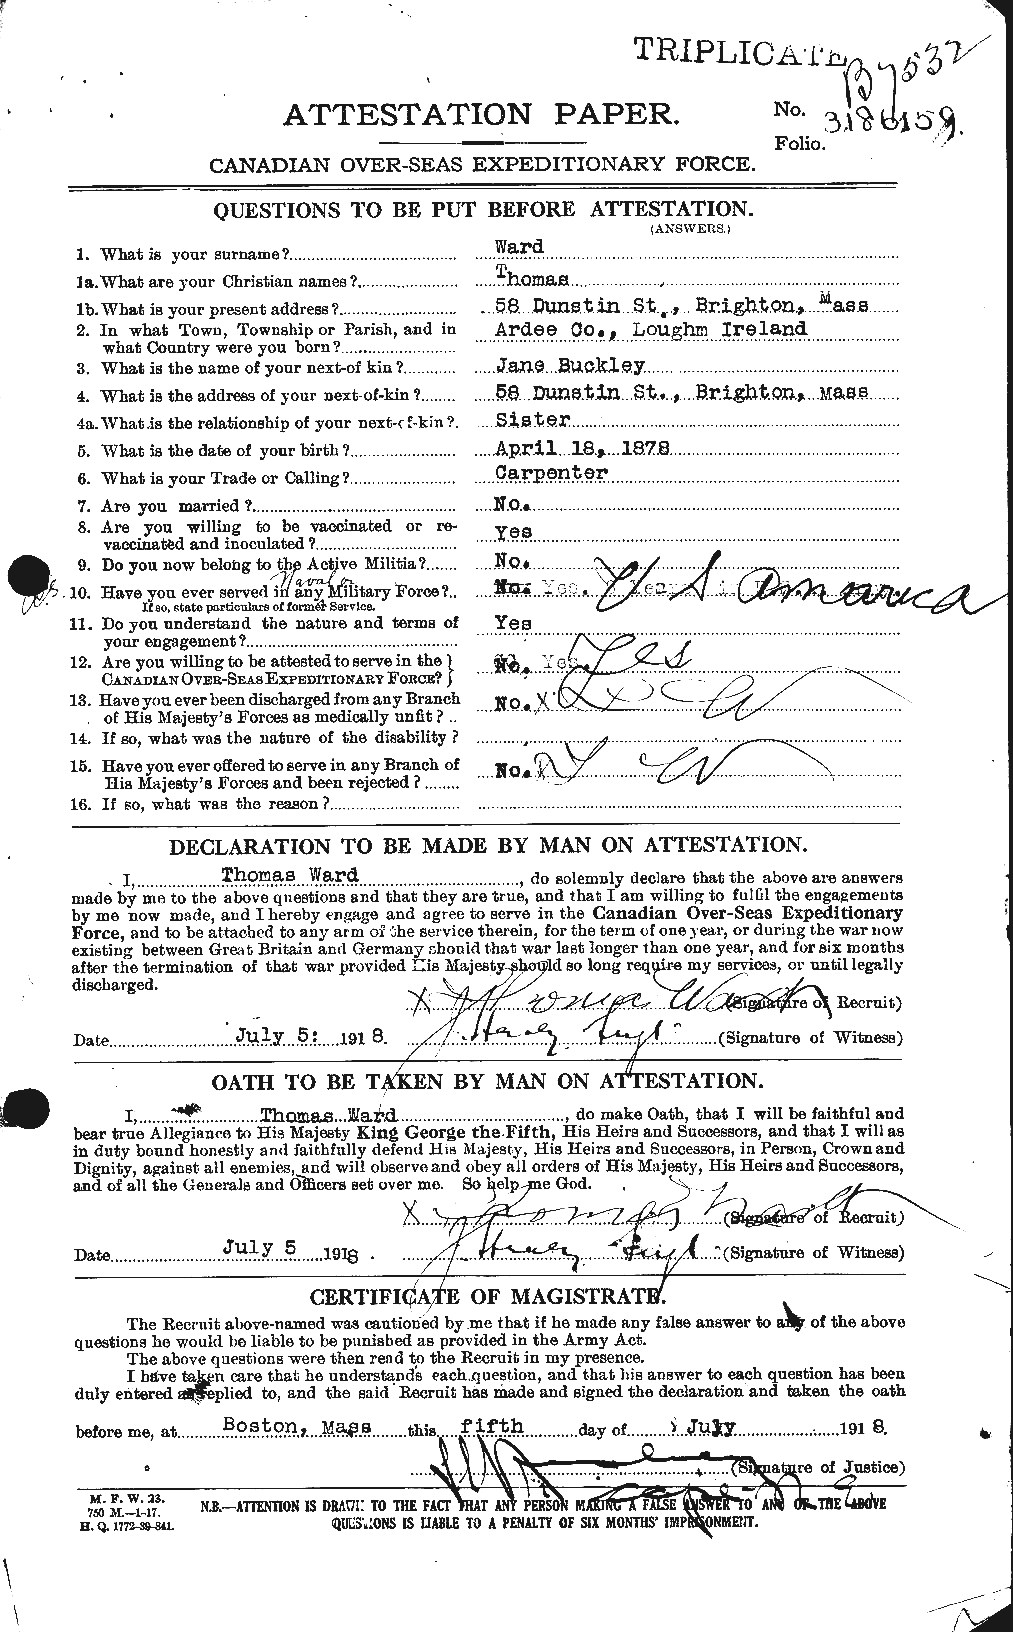 Personnel Records of the First World War - CEF 659718a